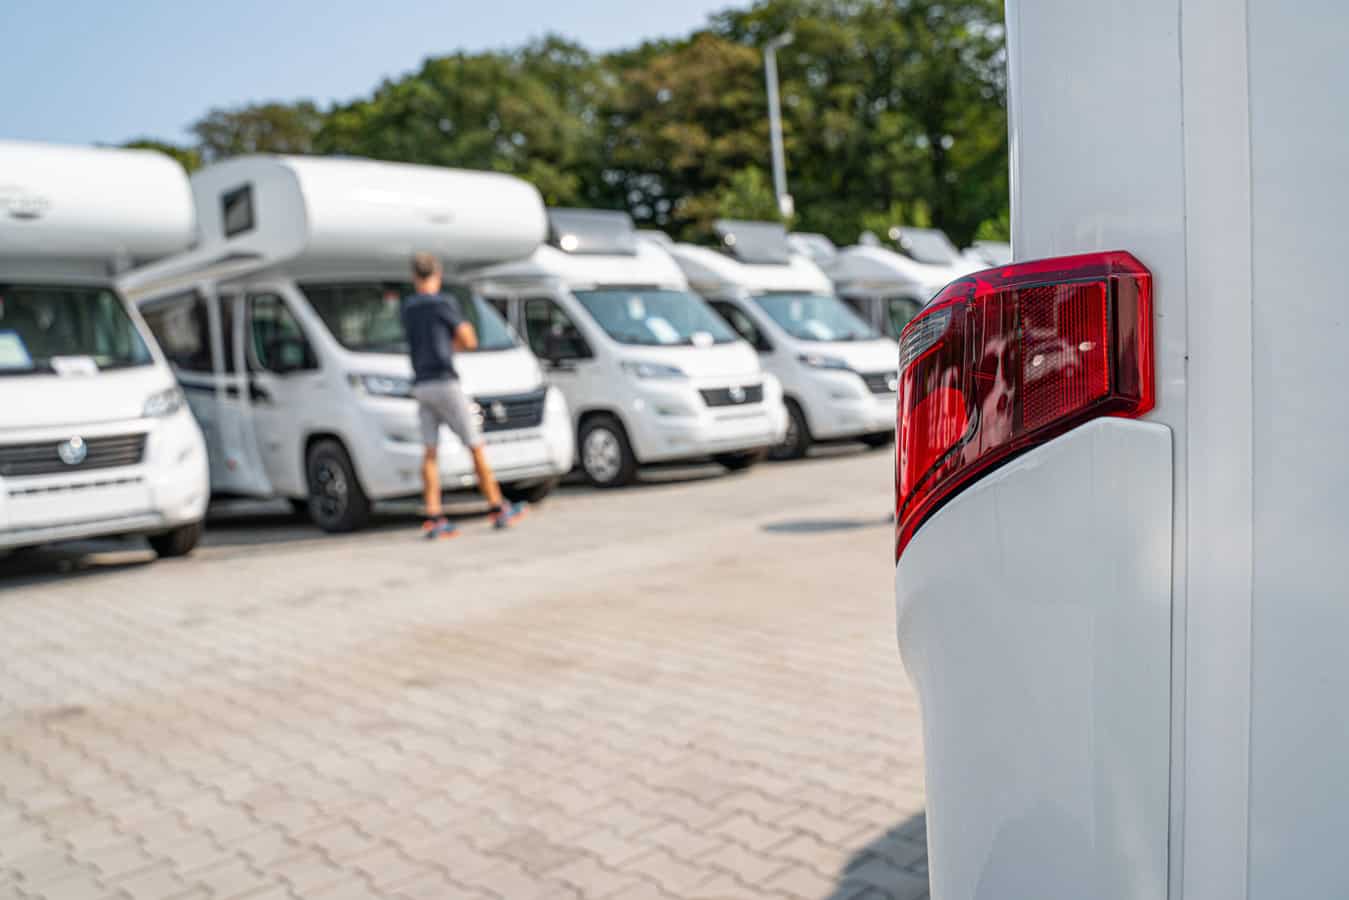 Line of Brand New Motorhomes Awaiting Clients on Dealership Sales Lot. Recreational Vehicles Selling. Caravanning Industry - feature image for RV recalls